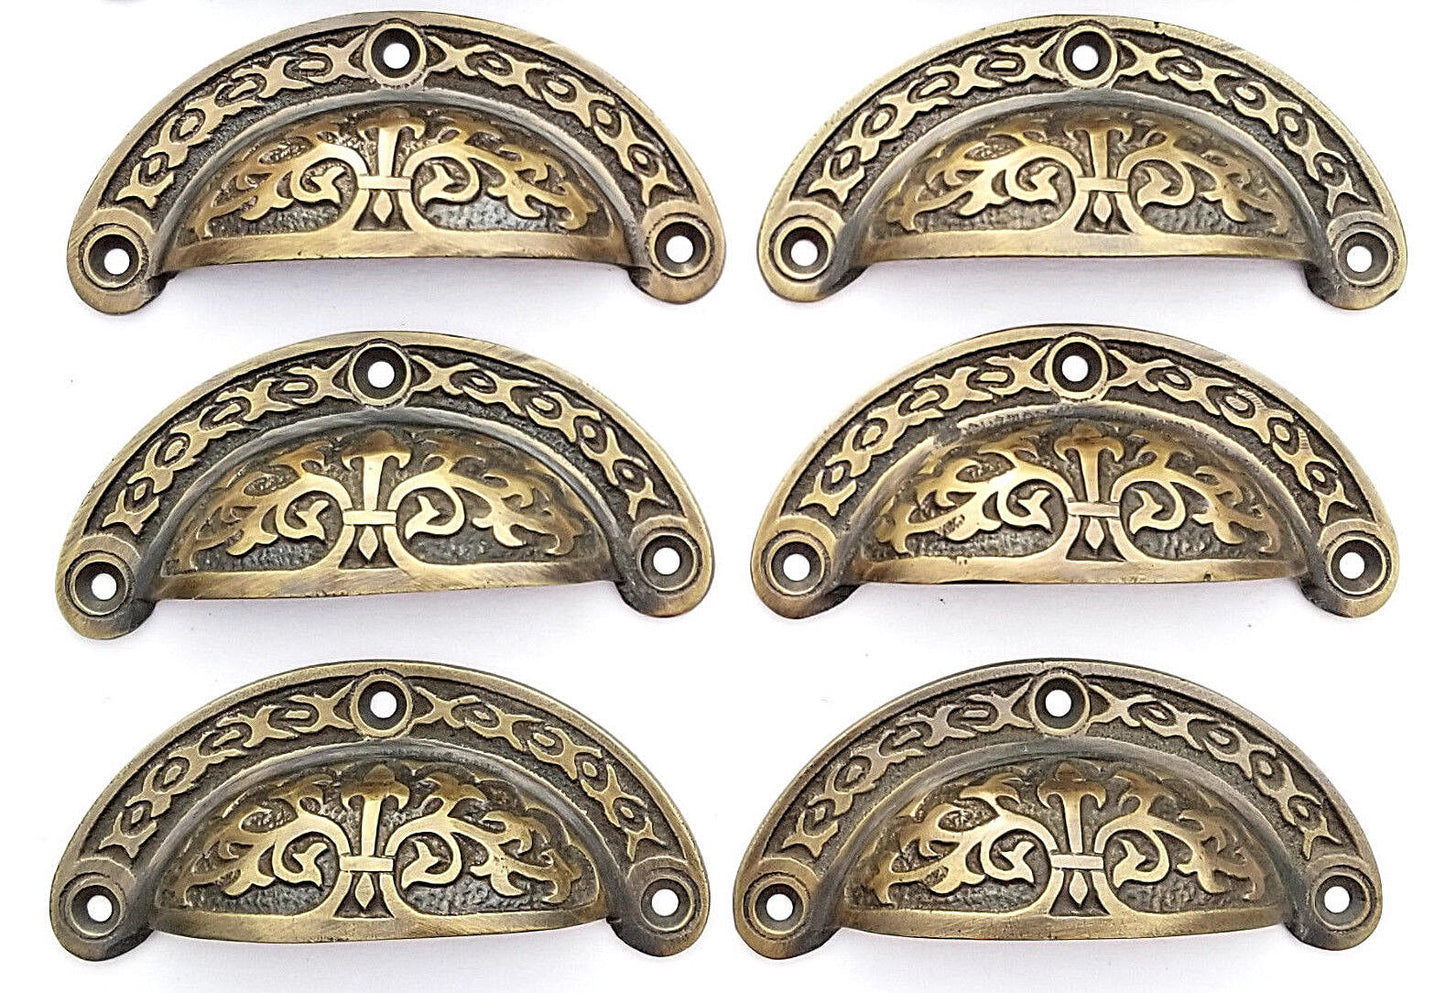 6 Antique vtg. Style Victorian Brass Apothecary Bin Pulls Handles 3"cntr  #A5